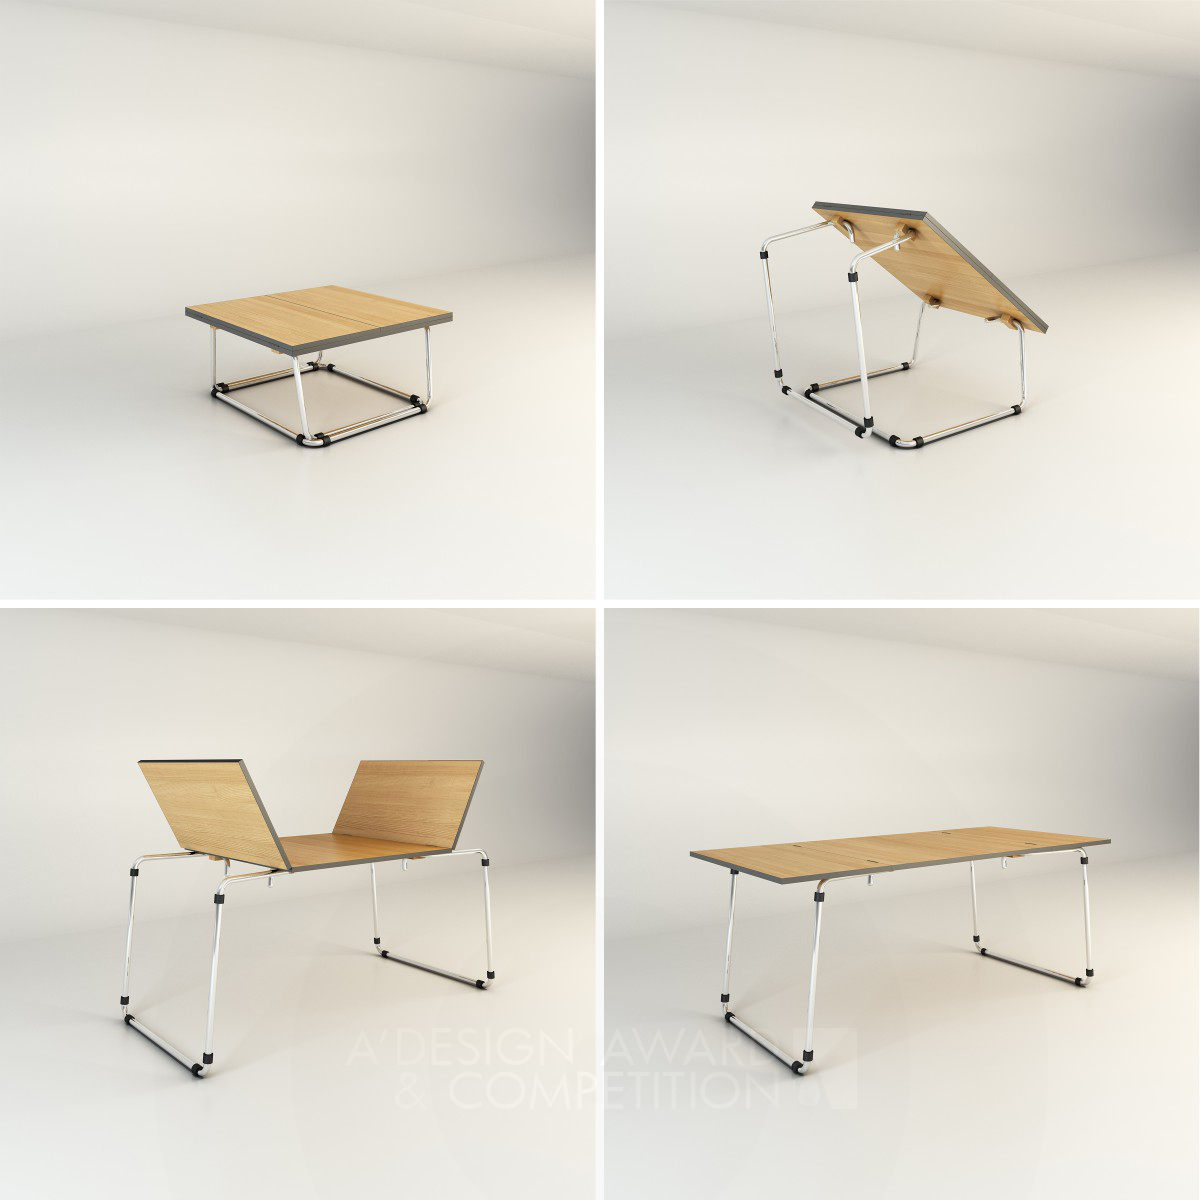 Air table <b>Coffee table/dinning table